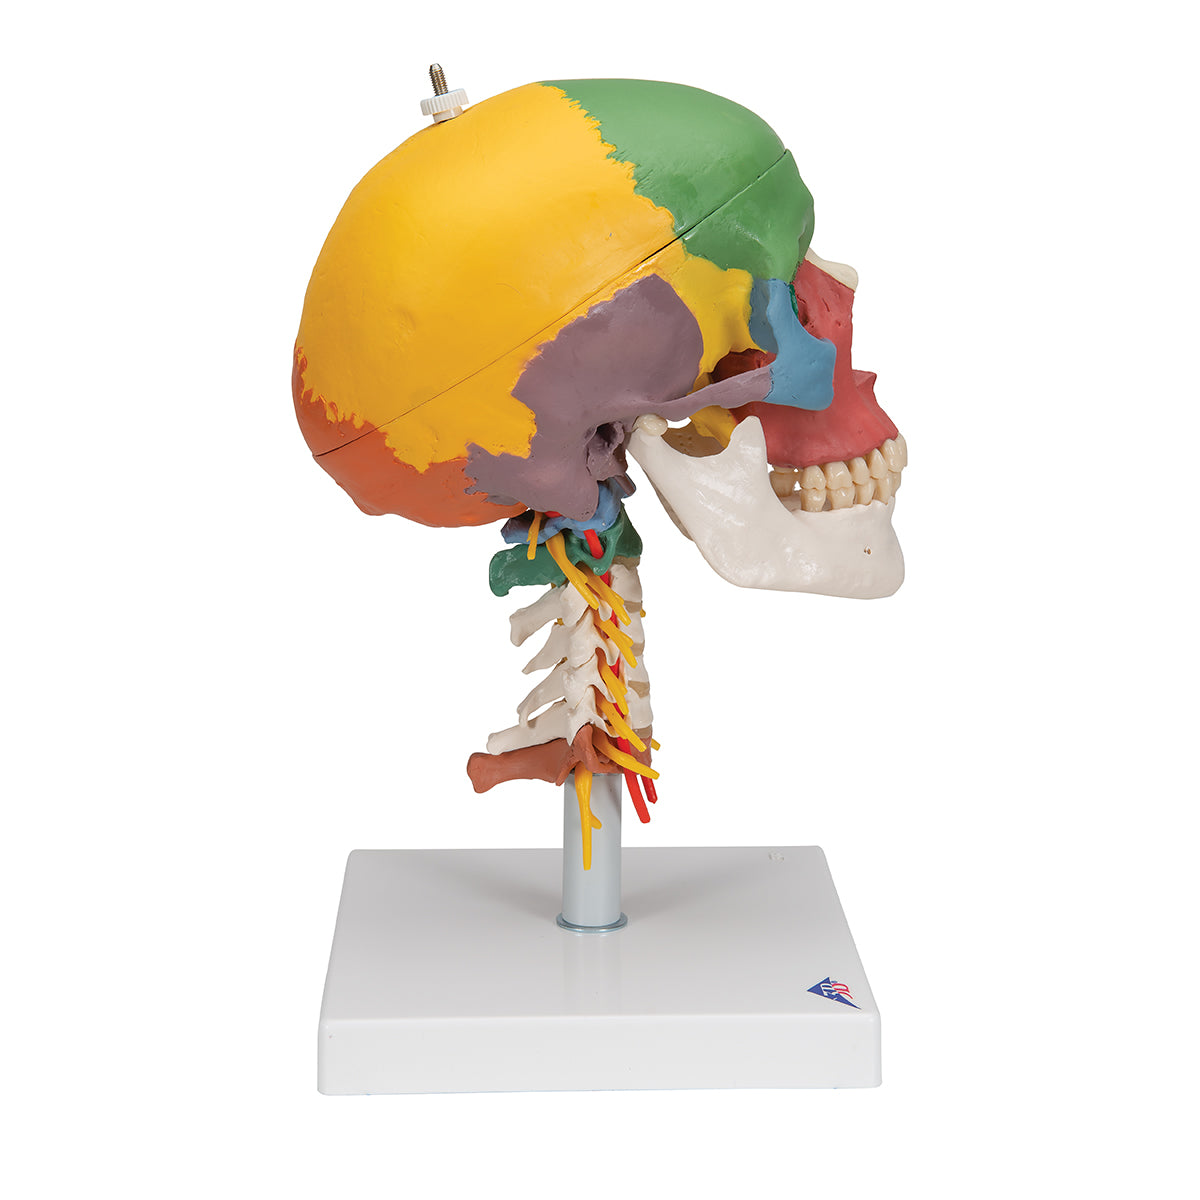 Skull model with colors, cervical vertebrae and more